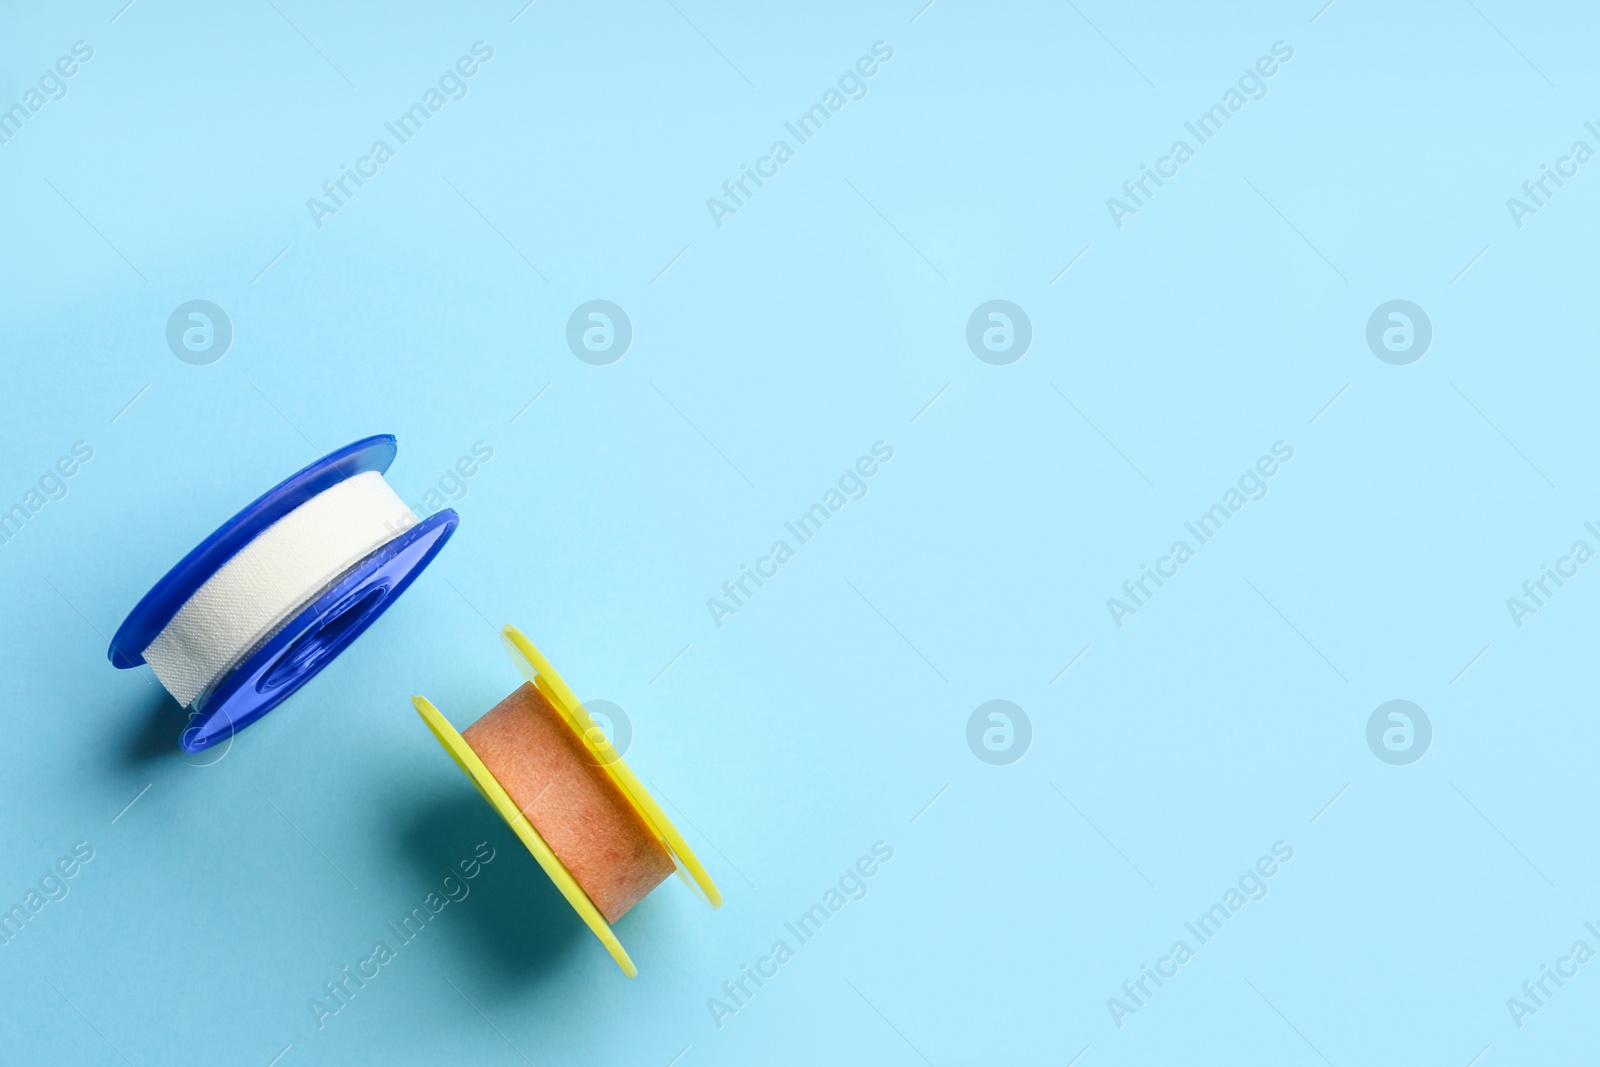 Photo of Sticking plaster rolls on light blue background, flat lay. Space for text